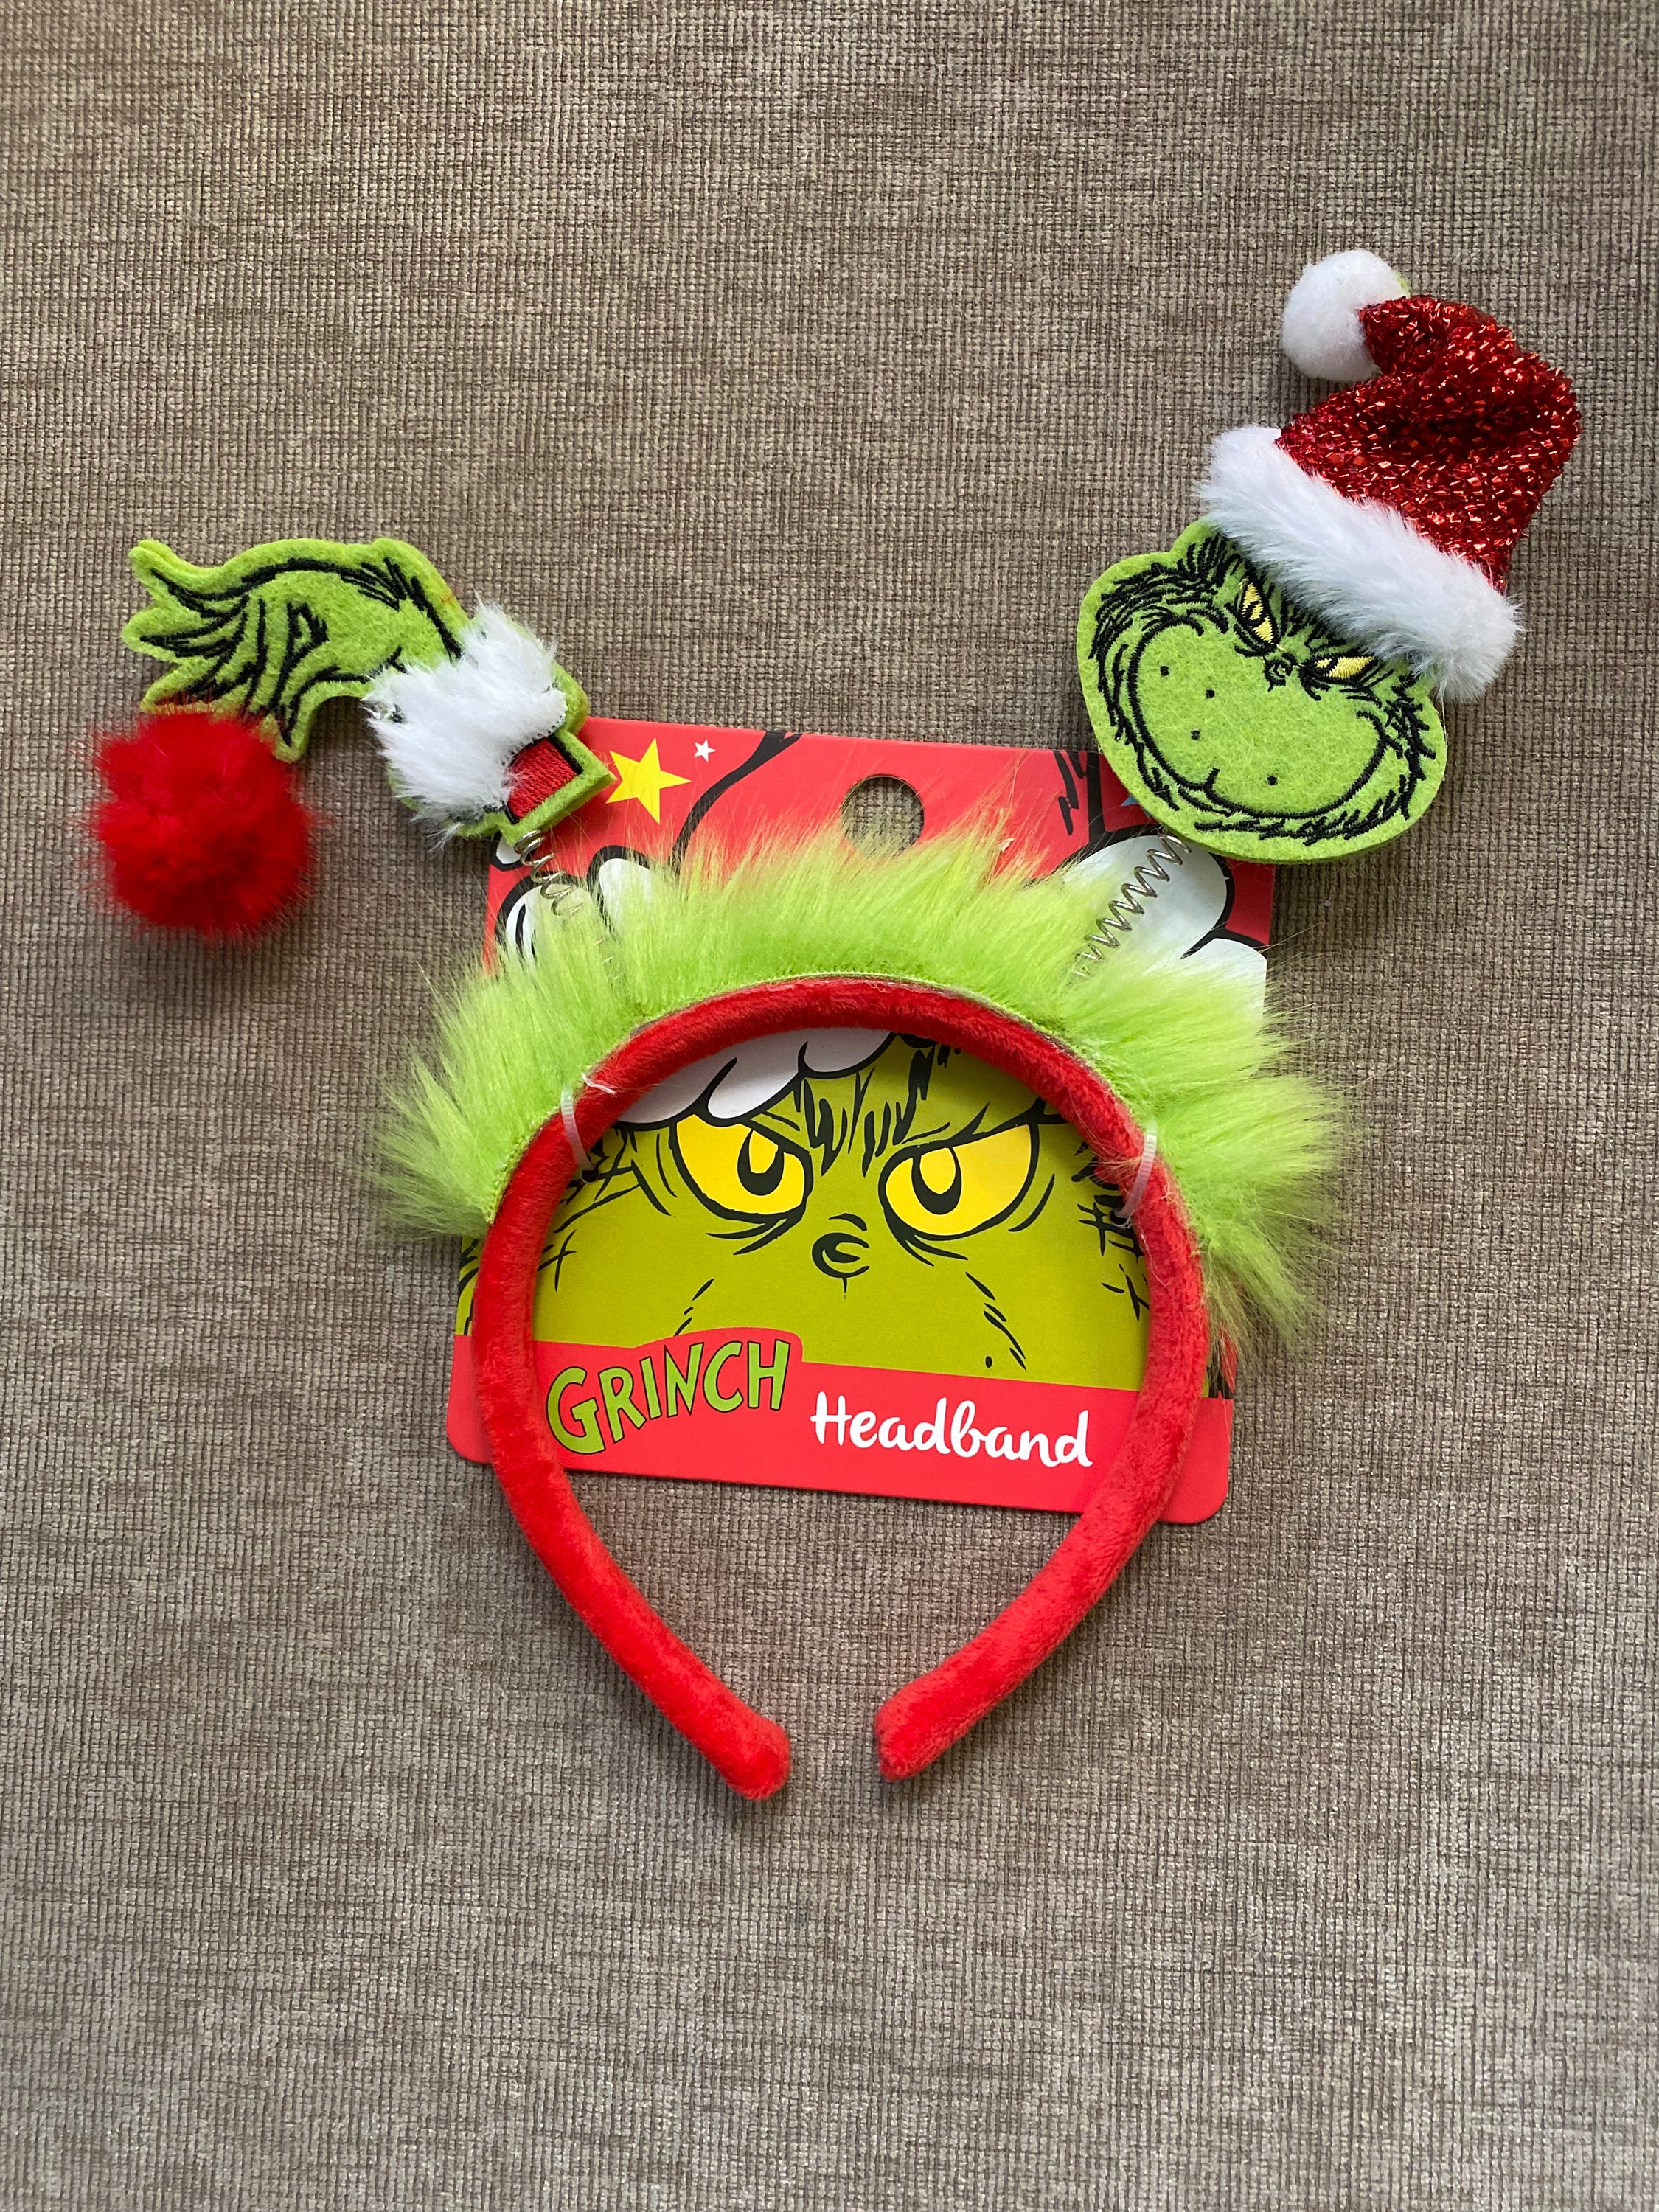 Hanety Grinch Christmas Decorations,Christmas Ornaments,Grinch Decor,Adult Kid Christmas Cosplay Antlers Headband Headclip Accessories,Christmas Gifts